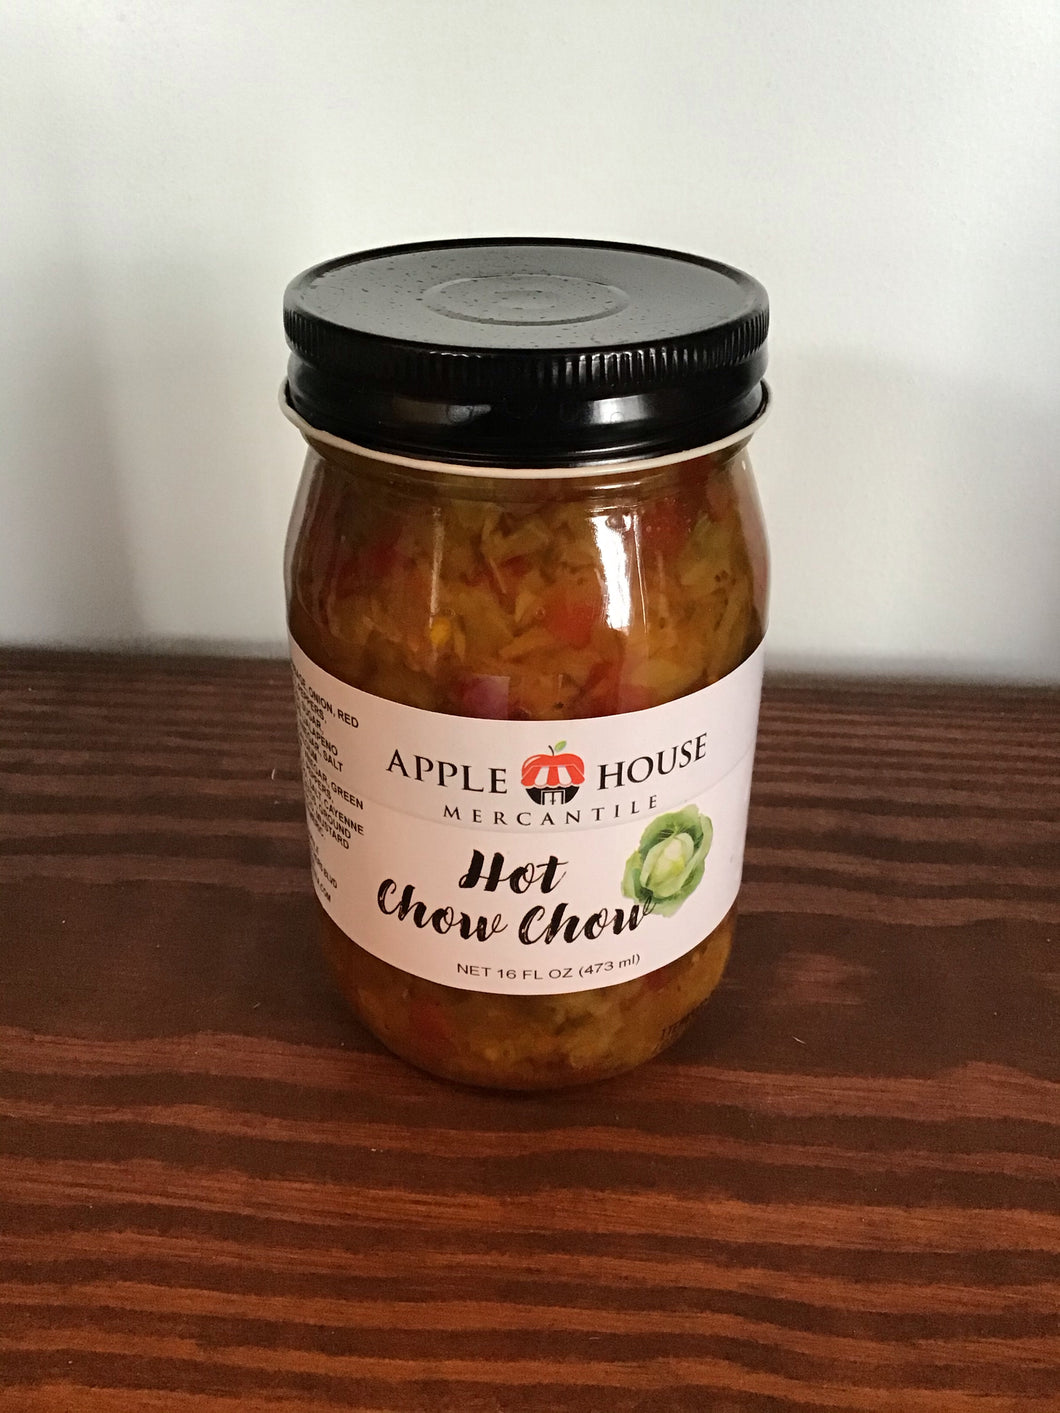 Chow Chow HOT Relish by AHM